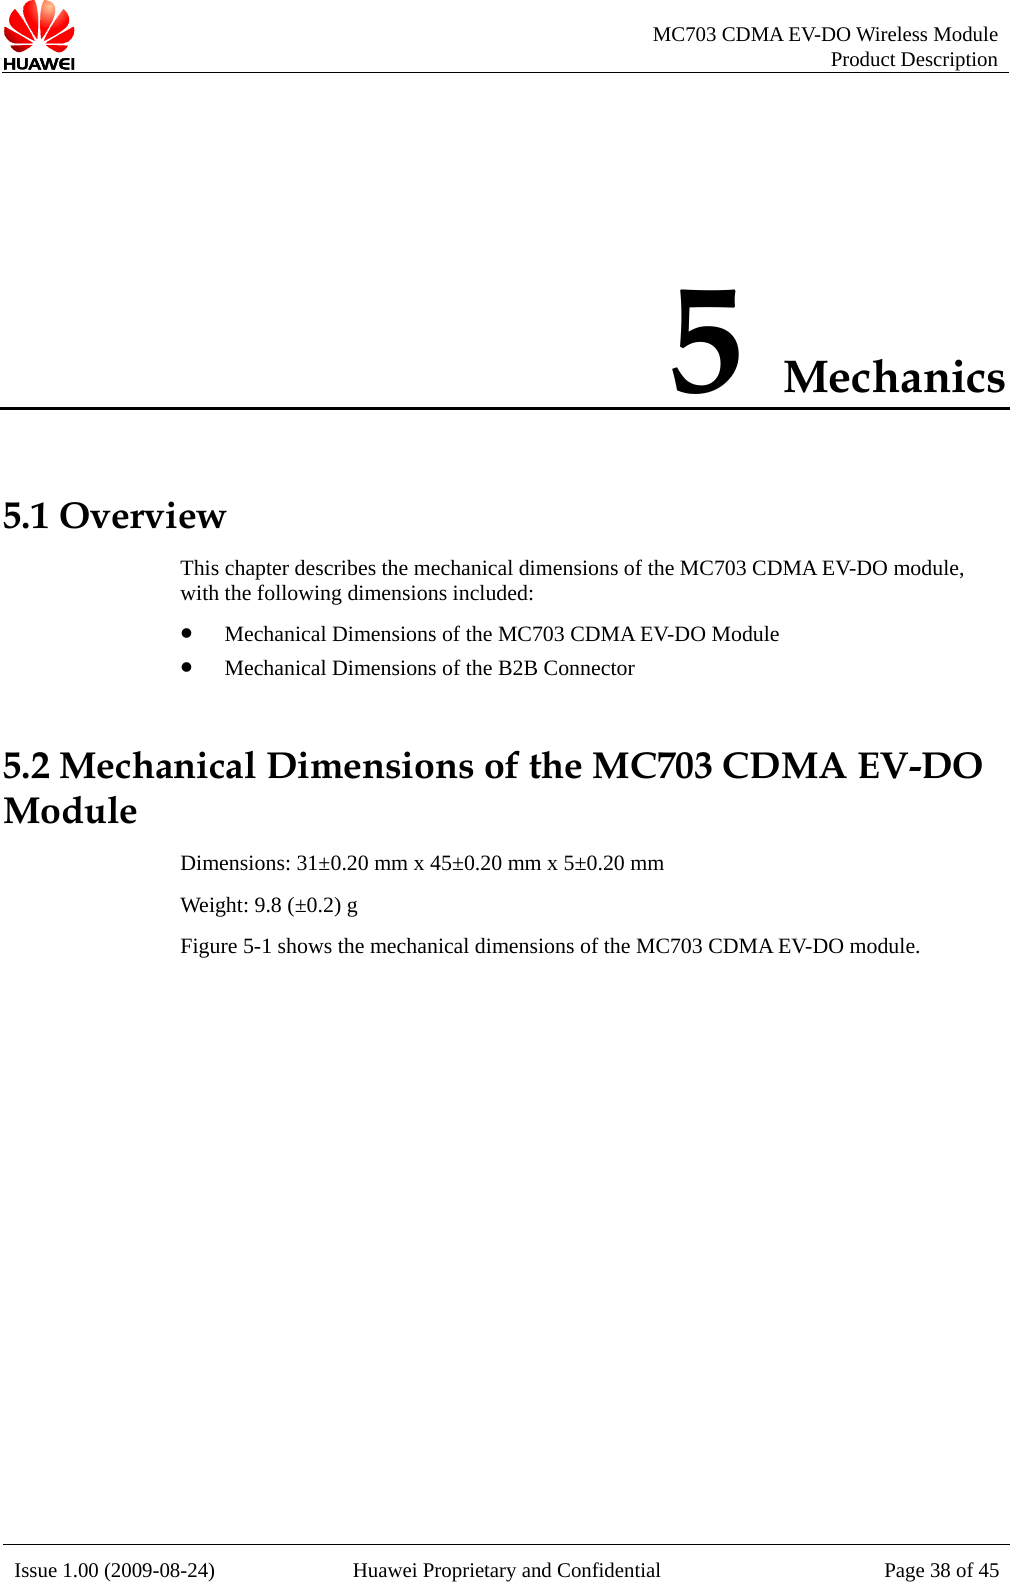   MC703 CDMA EV-DO Wireless Module Product Description Issue 1.00 (2009-08-24)  Huawei Proprietary and Confidential Page 38 of 455 Mechanics 5.1 Overview the MC703 CDMA EV-DO module, with the following dimensions included: z Mechanical Dimensions of the MC703 CDMA EV-DO Module 5.2 Mechanical Dimensions of the MC703 CDMA EV-DO Module Weight: 9.8 (±0.2) g Figure 5-1 shows the mechanical dimensions of the MC703 CDMA EV-DO module. This chapter describes the mechanical dimensions of z Mechanical Dimensions of the B2B Connector Dimensions: 31±0.20 mm x 45±0.20 mm x 5±0.20 mm  